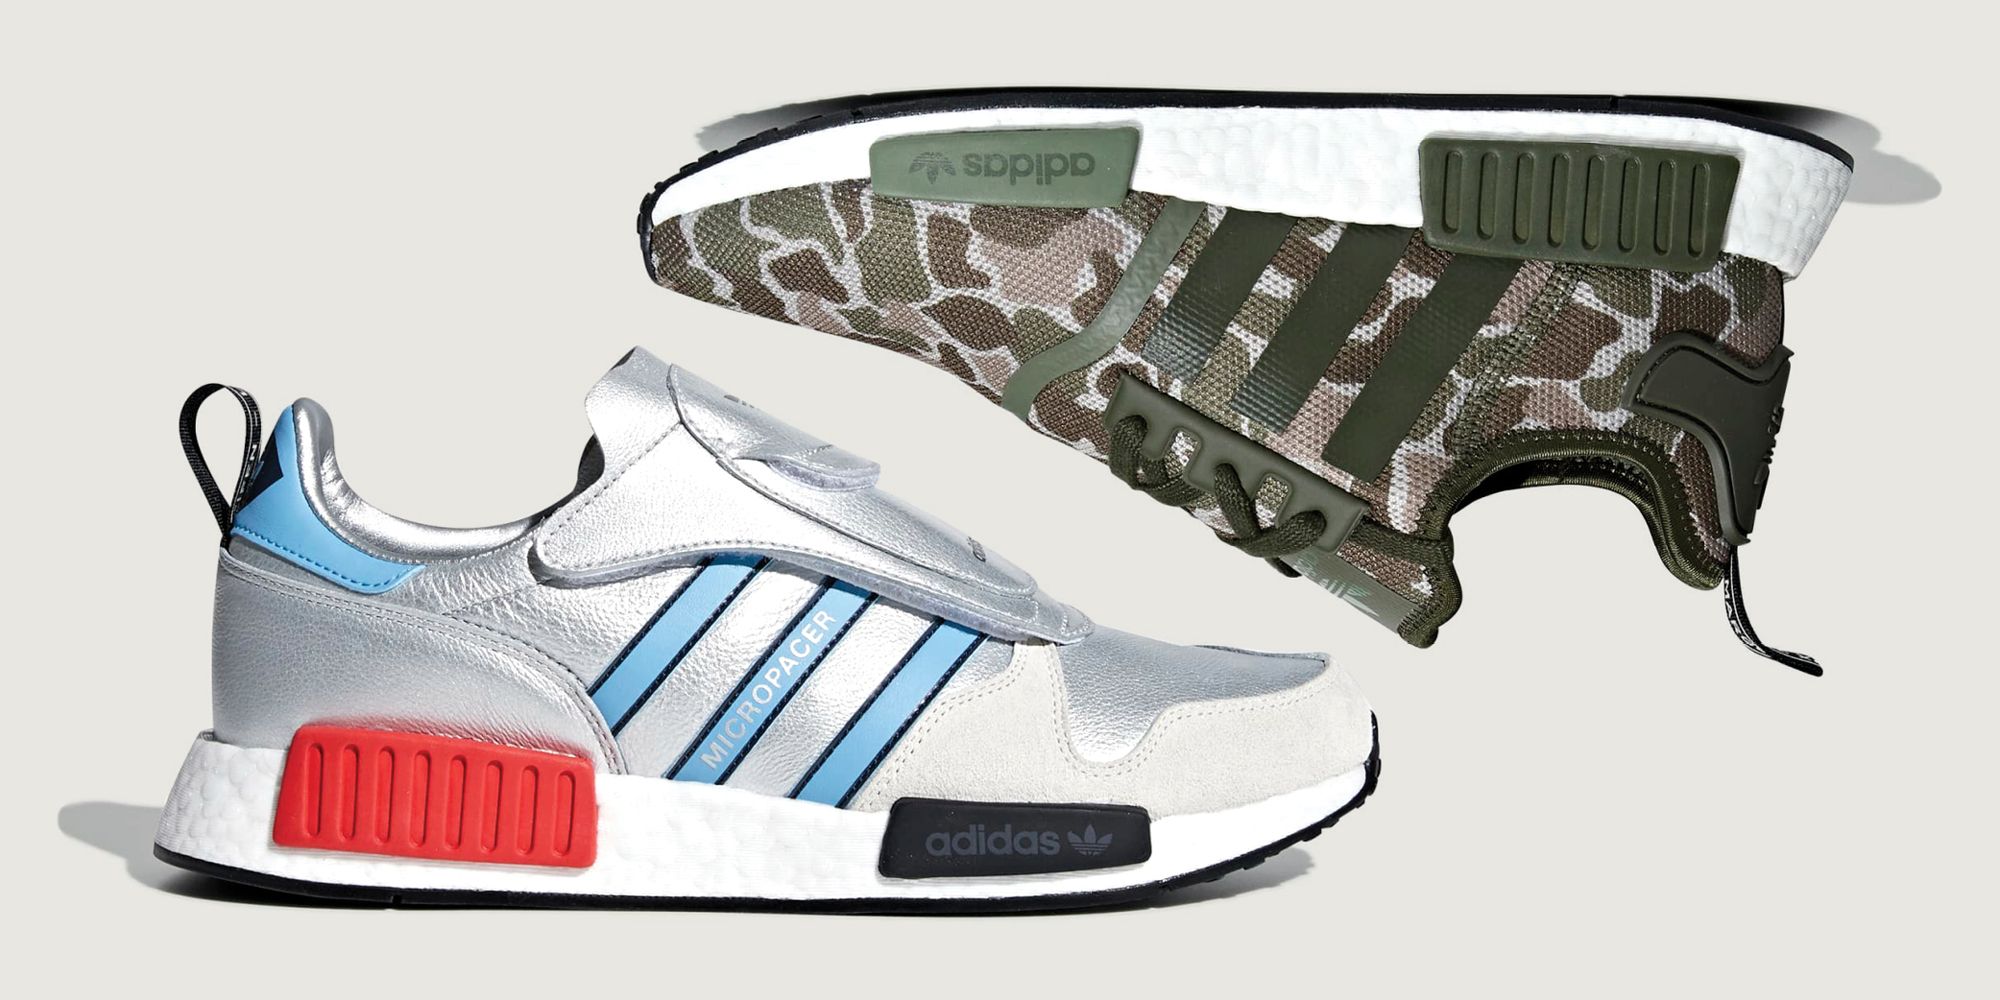 Adidas NMD Releases | New Adidas Shoes